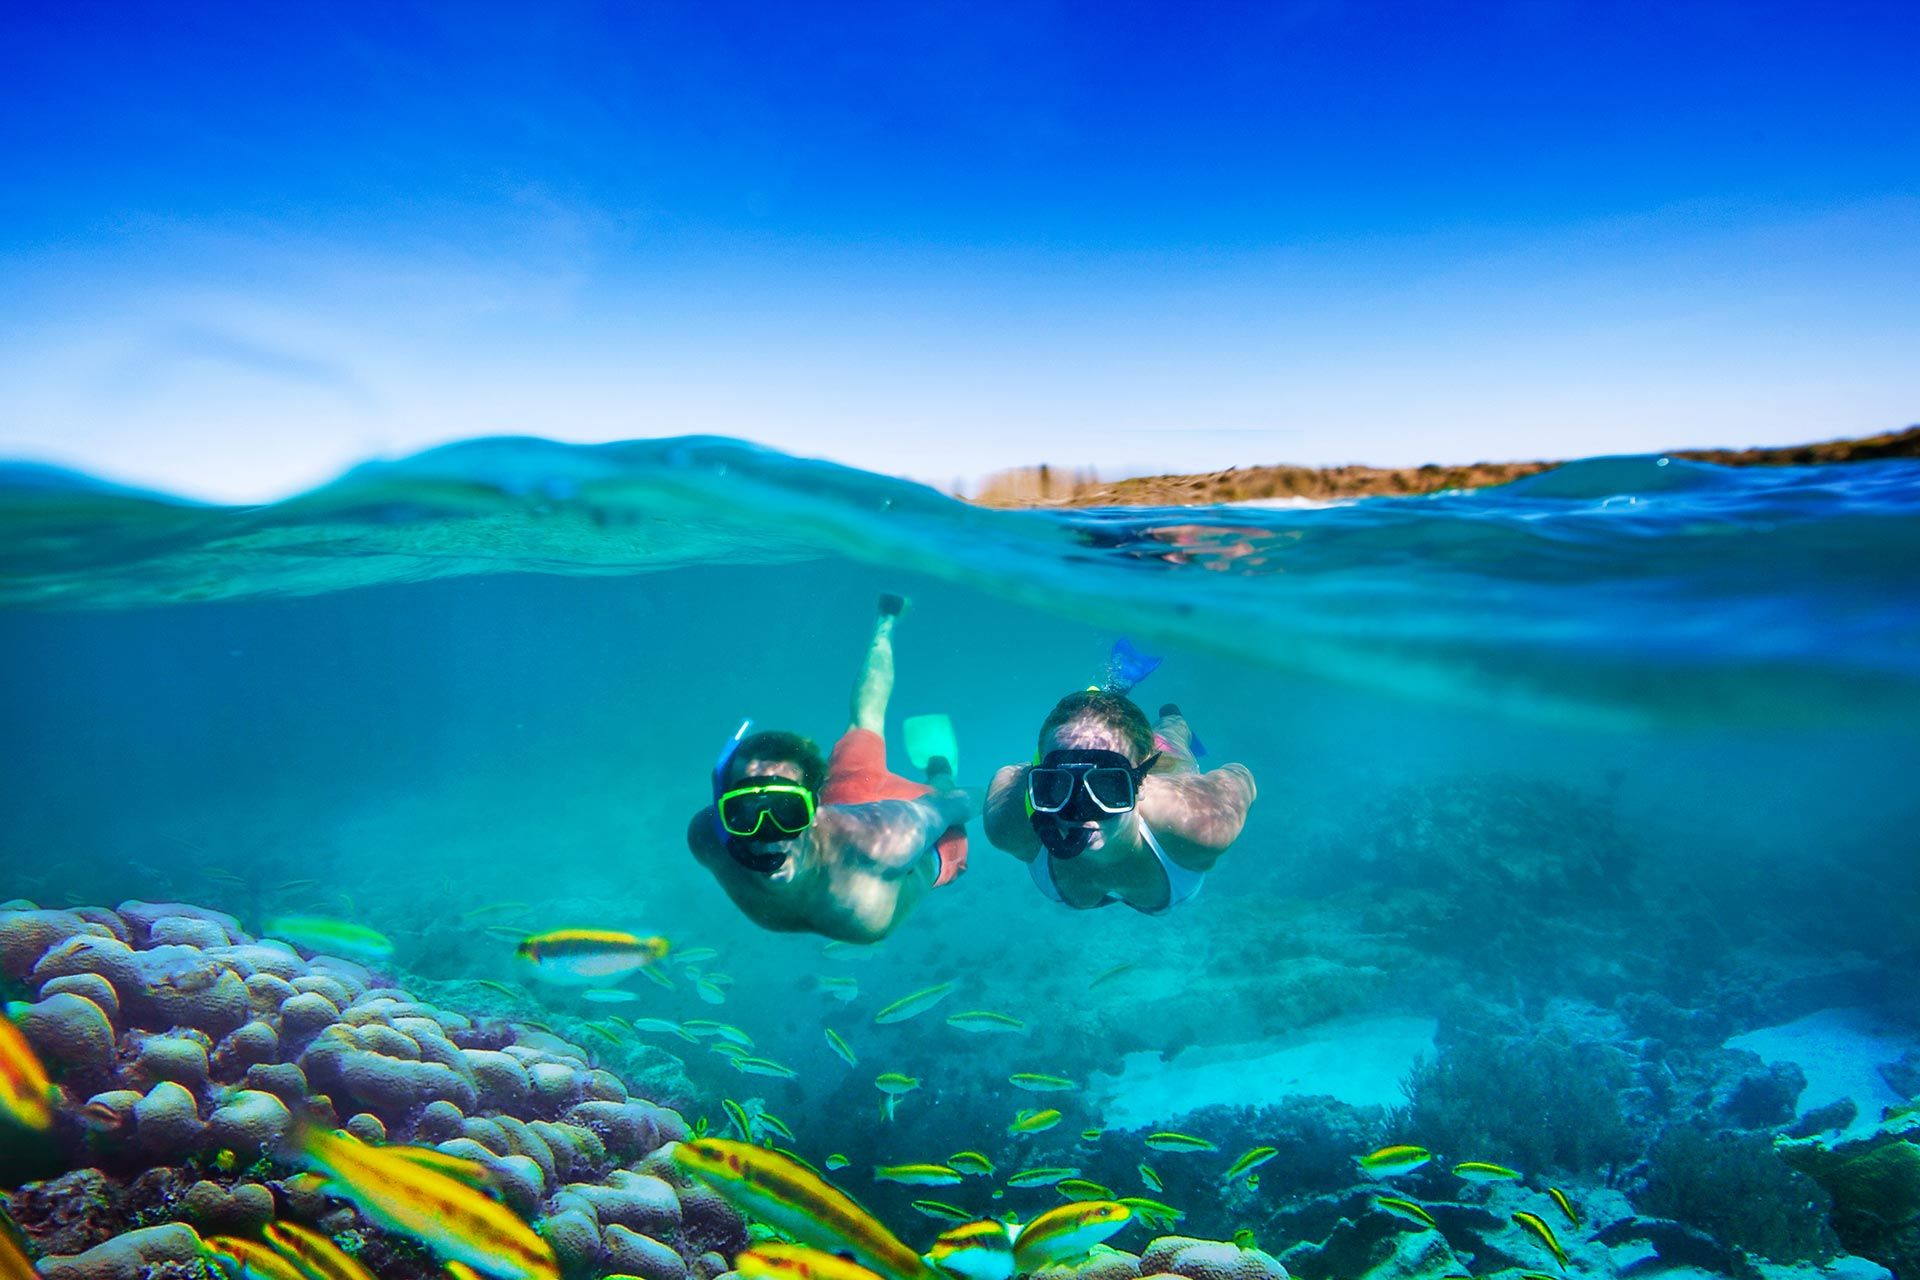 Amazing Snorkeling Tips For Beginners That Will Make You Look Like a Pro